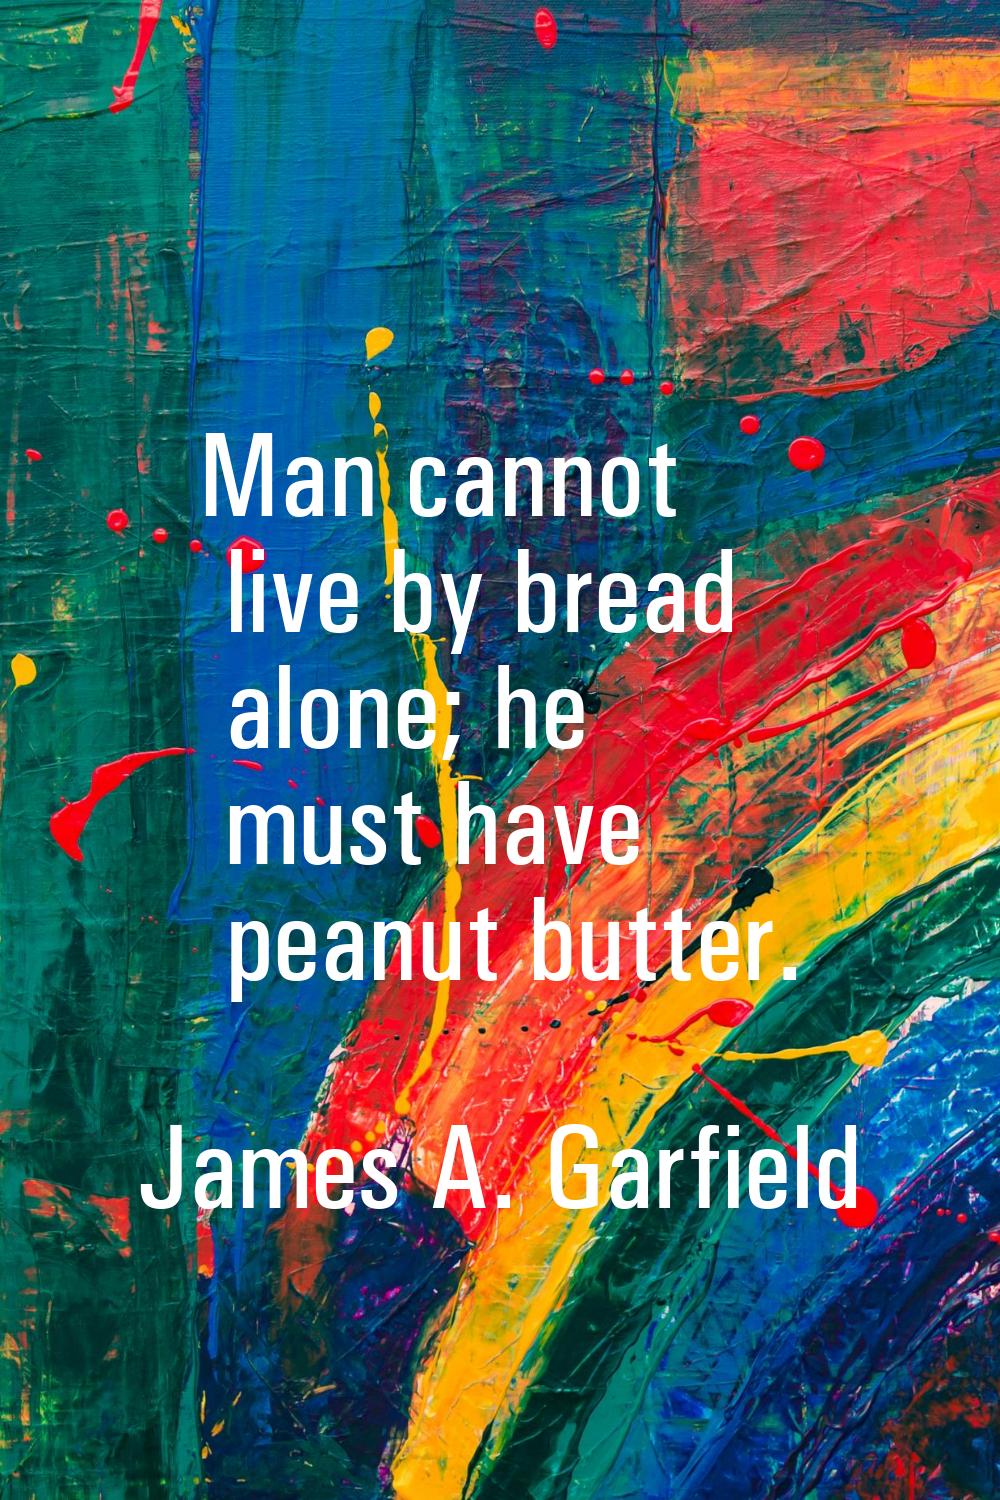 Man cannot live by bread alone; he must have peanut butter.